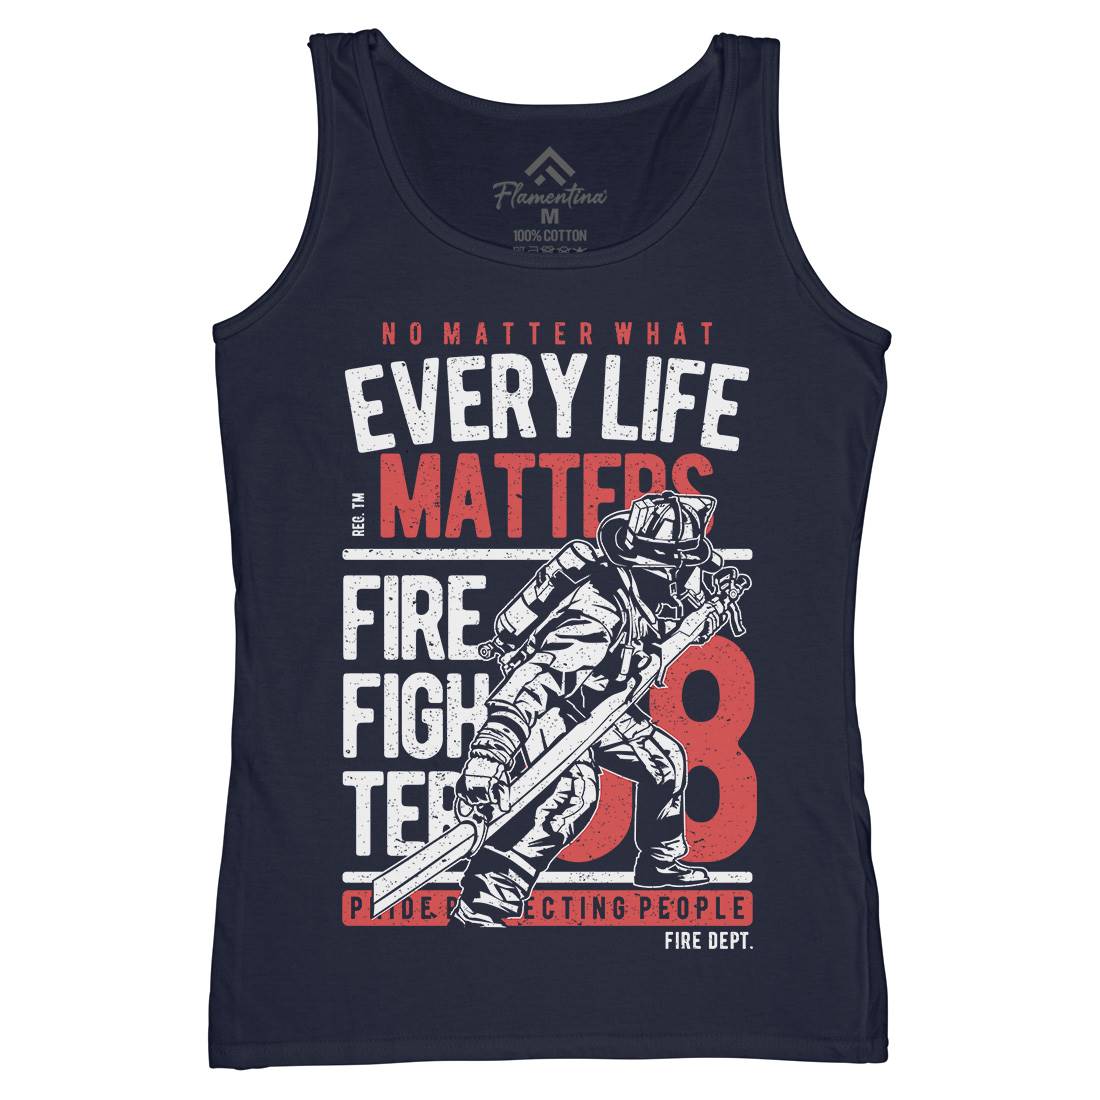 Every Life Matters Womens Organic Tank Top Vest Firefighters A650